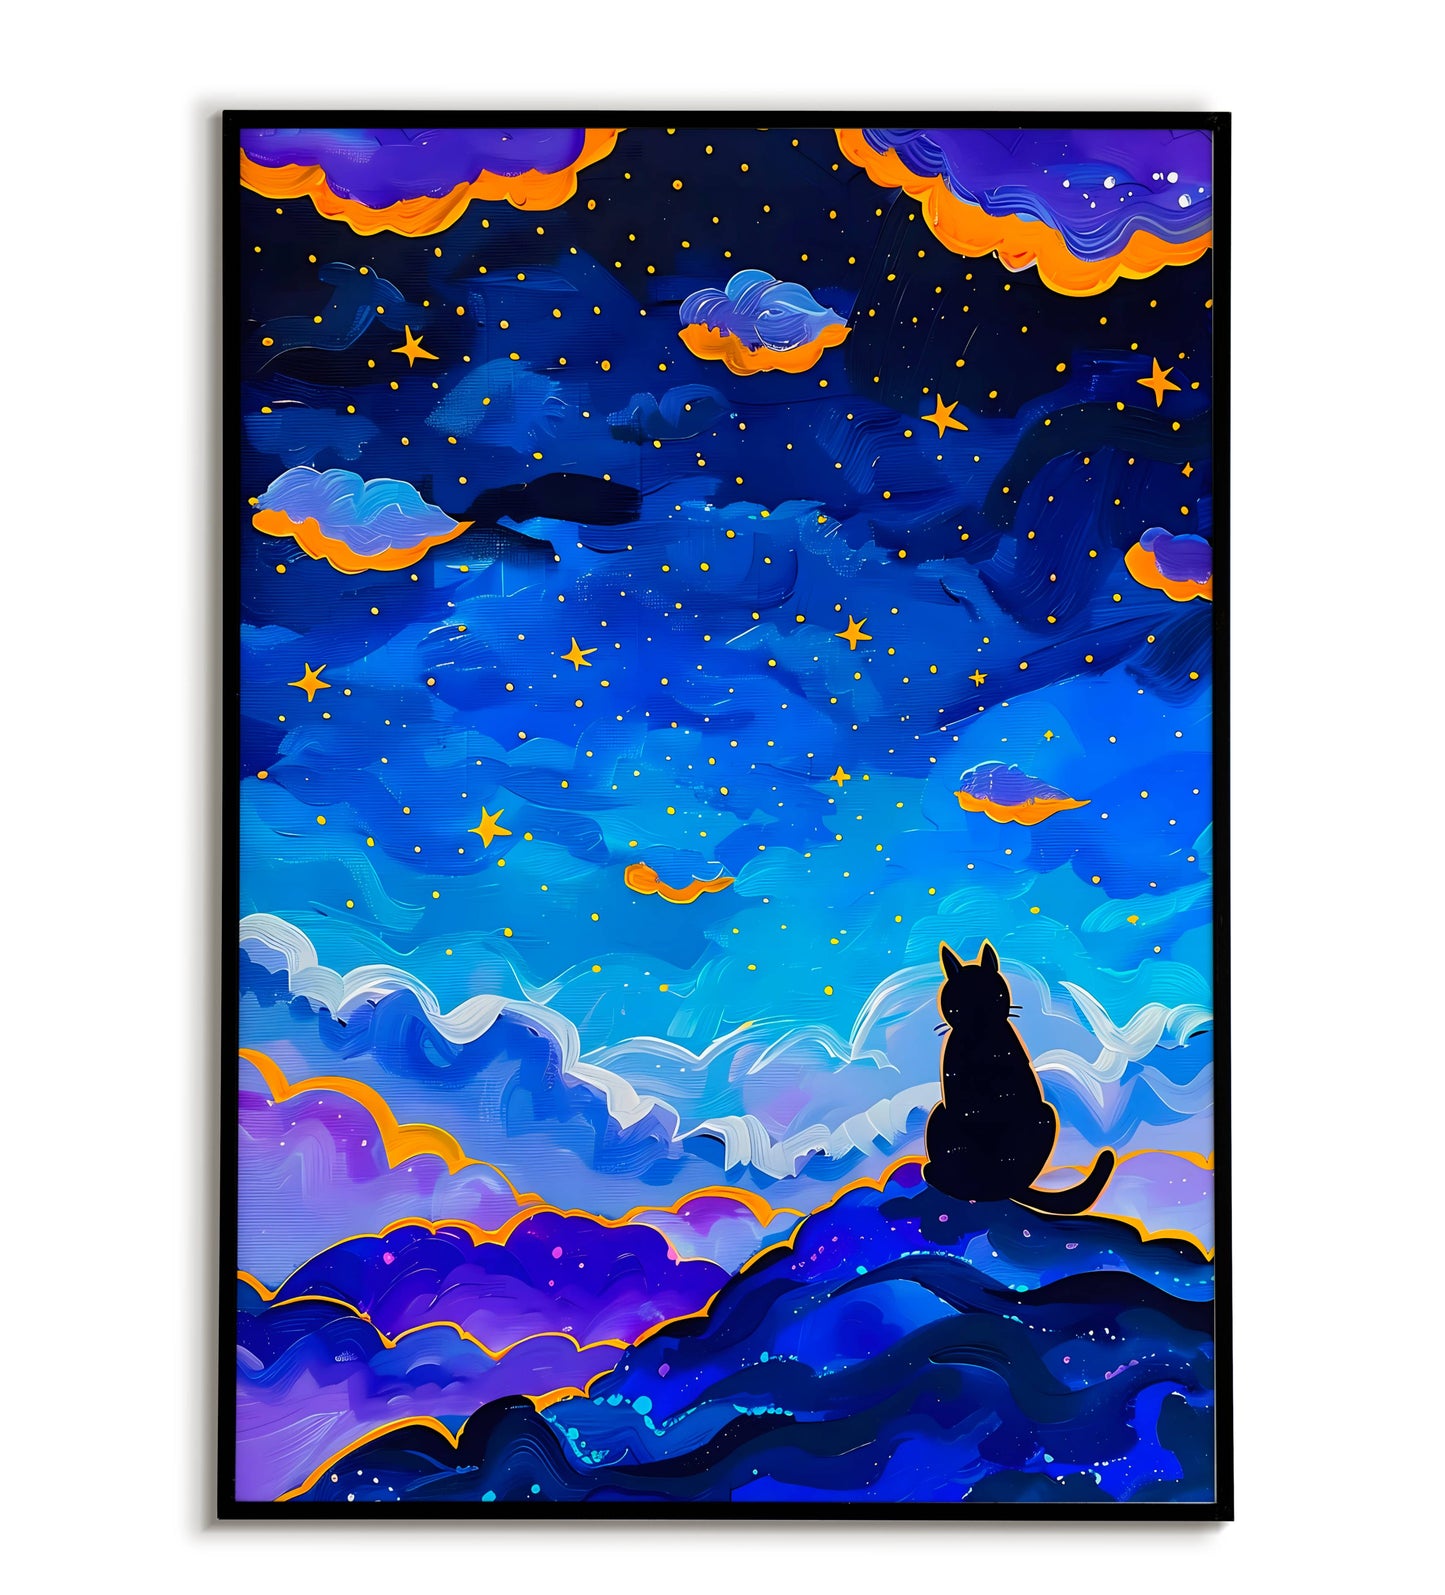 Starry Hillside Cat printable poster. Available for purchase as a physical poster or digital download.